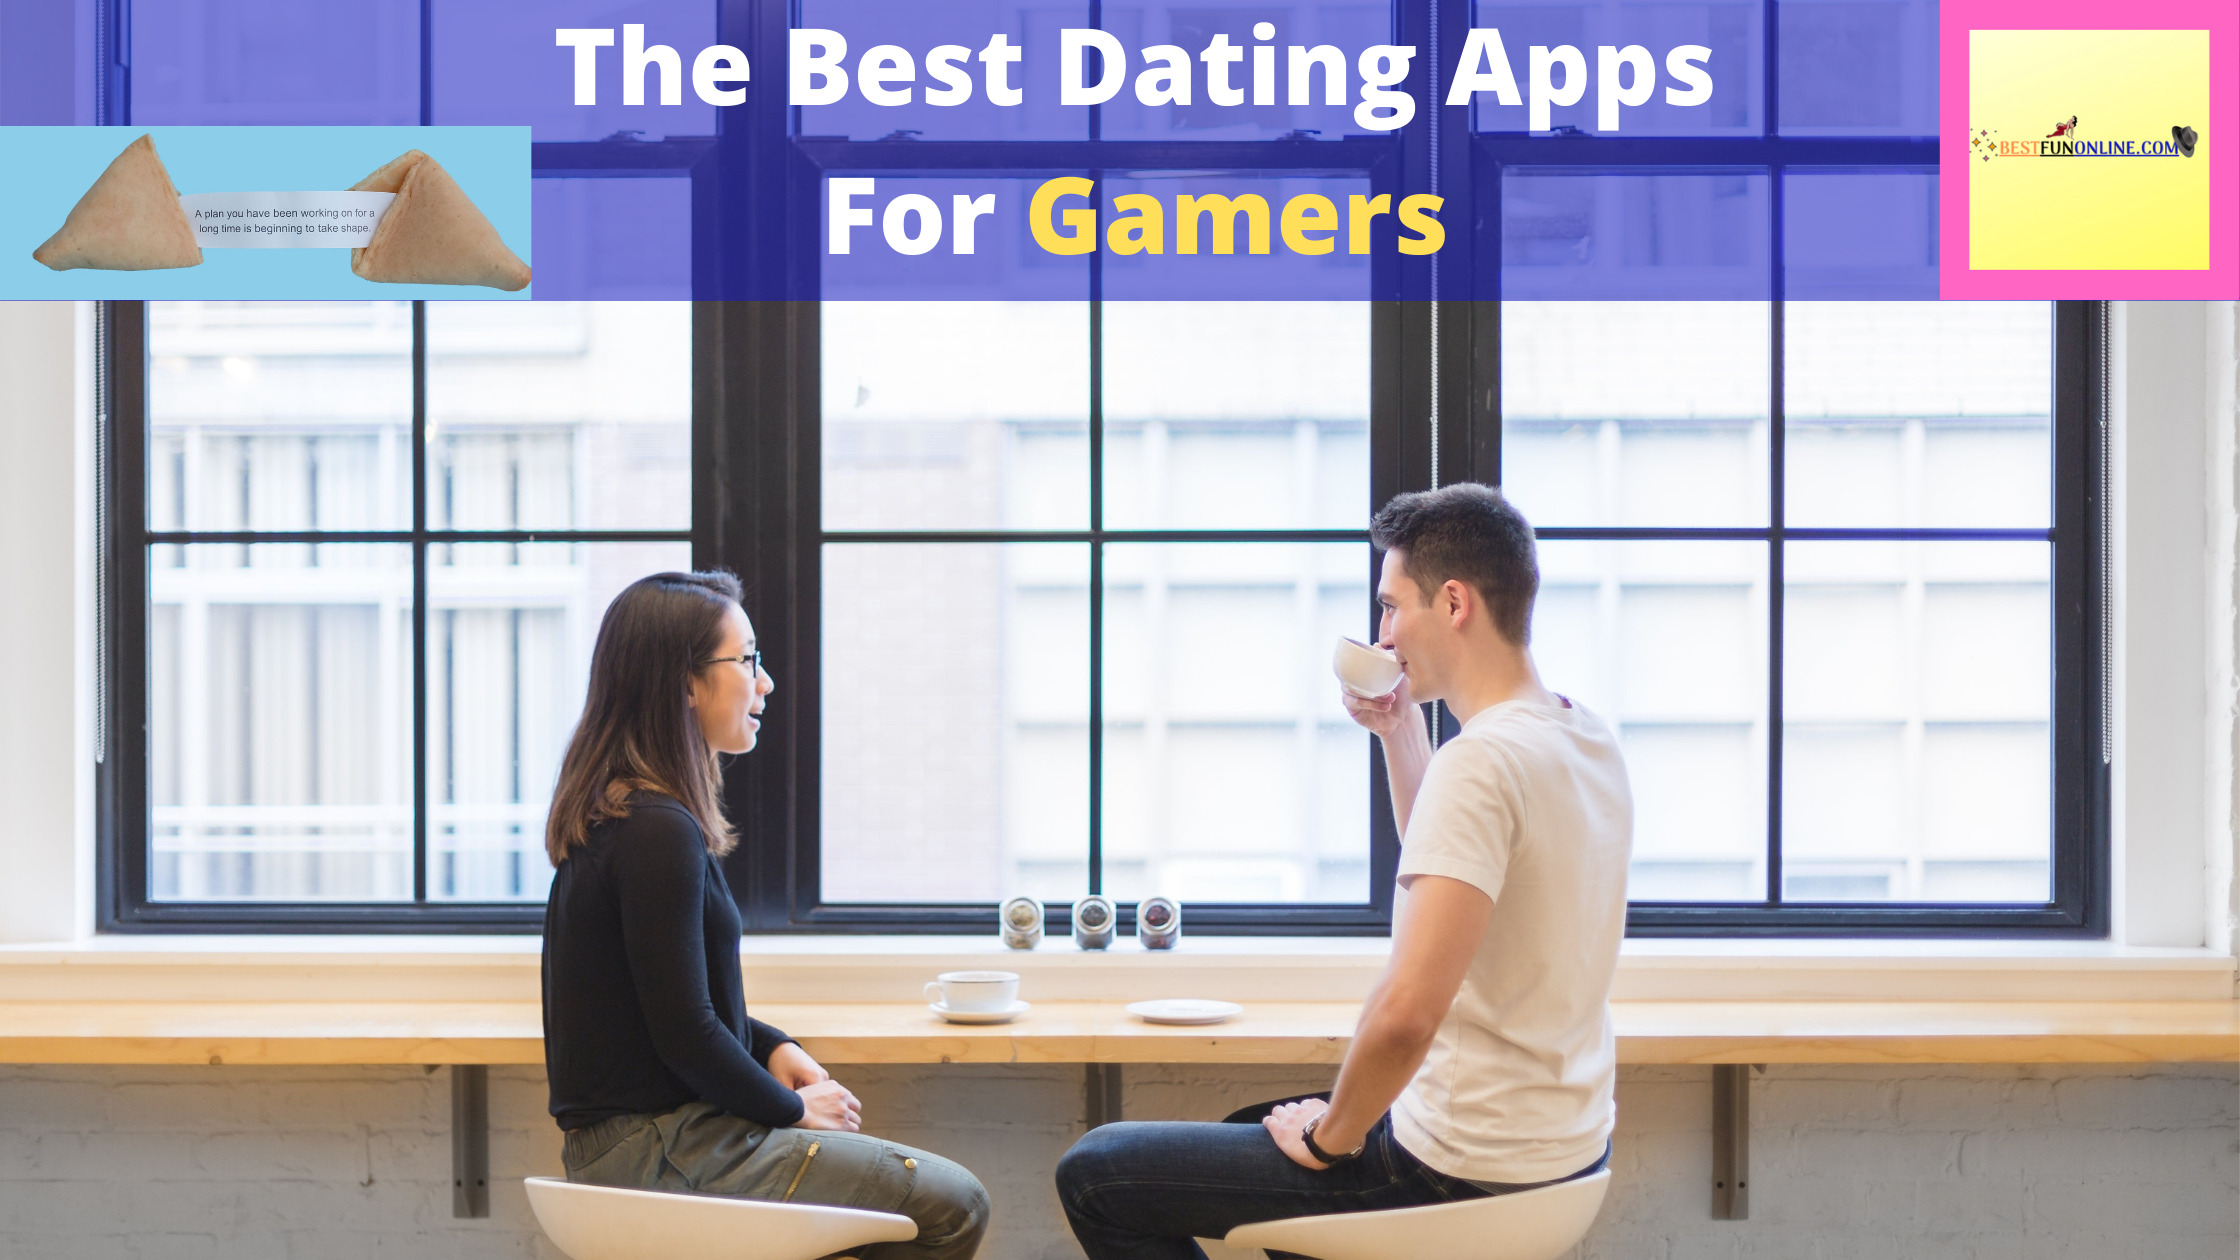 online dating sites list for gamers